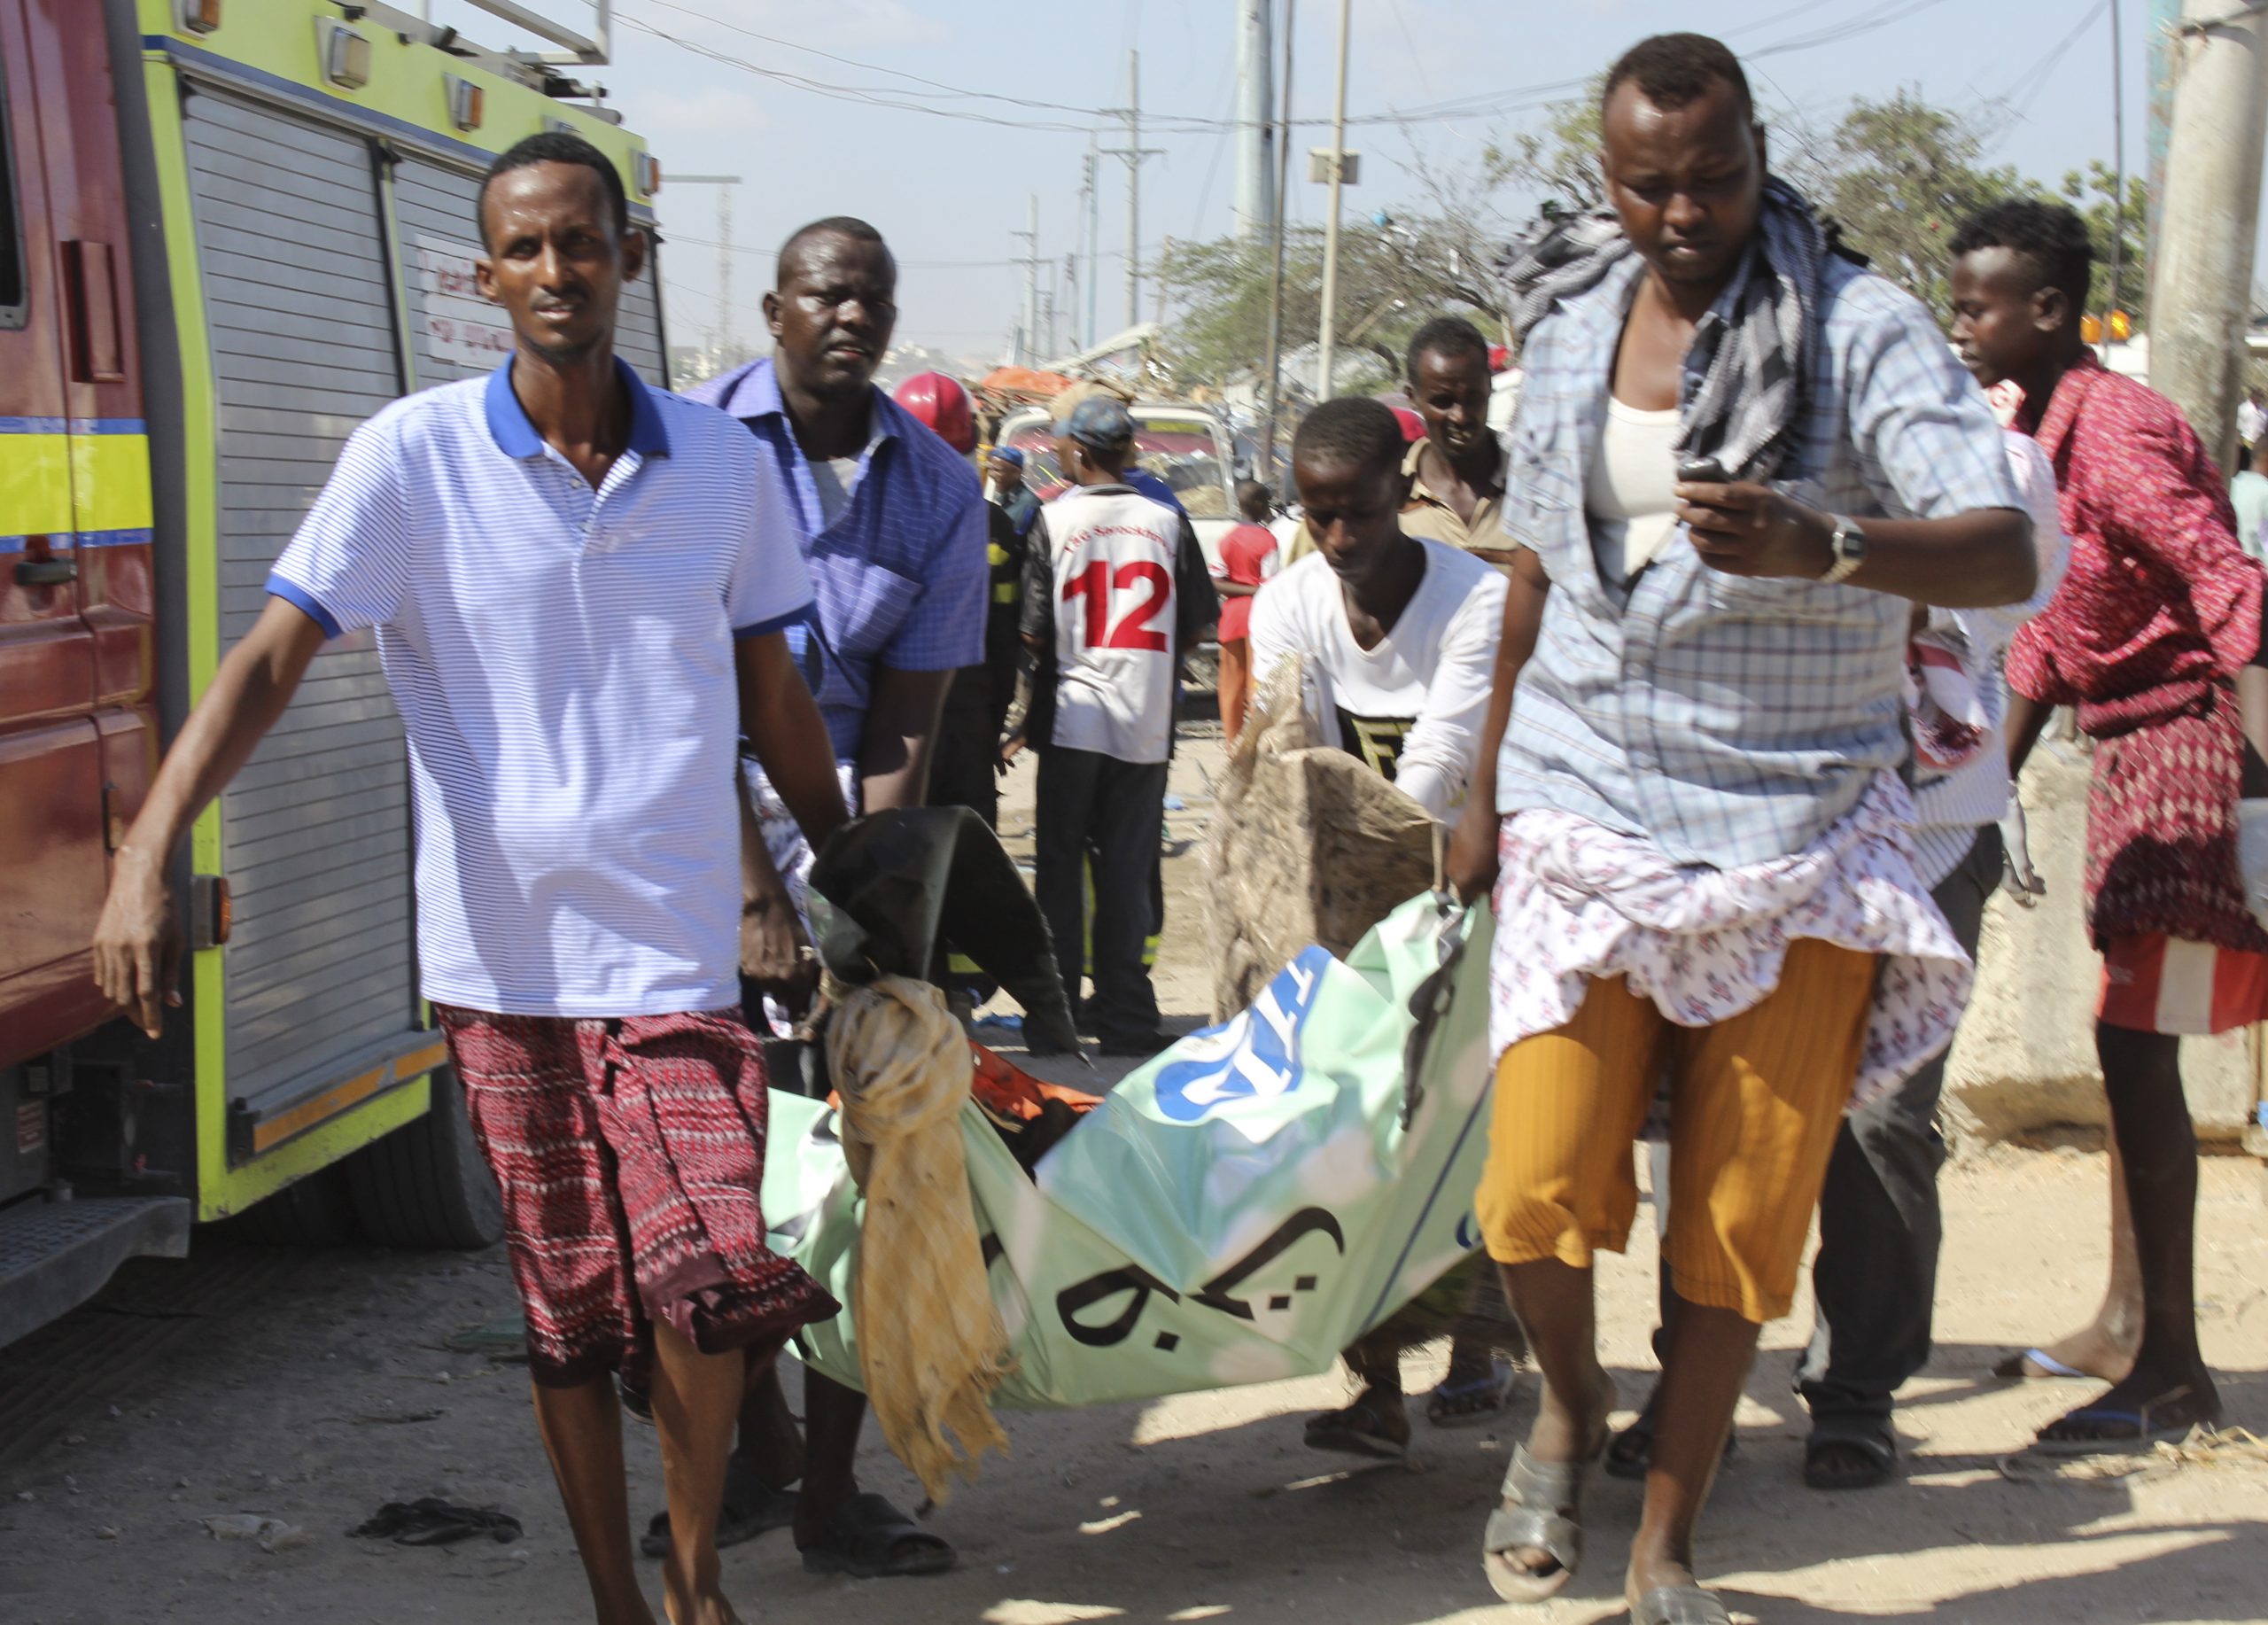 epa08092427 An injured person is carried away from the scene of a large explosion near a check point in Mogadishu, Somalia, 28 December 2019. A source at a hospital said that the death toll has risen to at least 76 in what is believed to have been a car bombing. The explosion rocked an area near the junction called Ex-Control Afgoye, in a southwestern suburb of the capital Mogadishu.  EPA/SAID YUSUF WARSAME